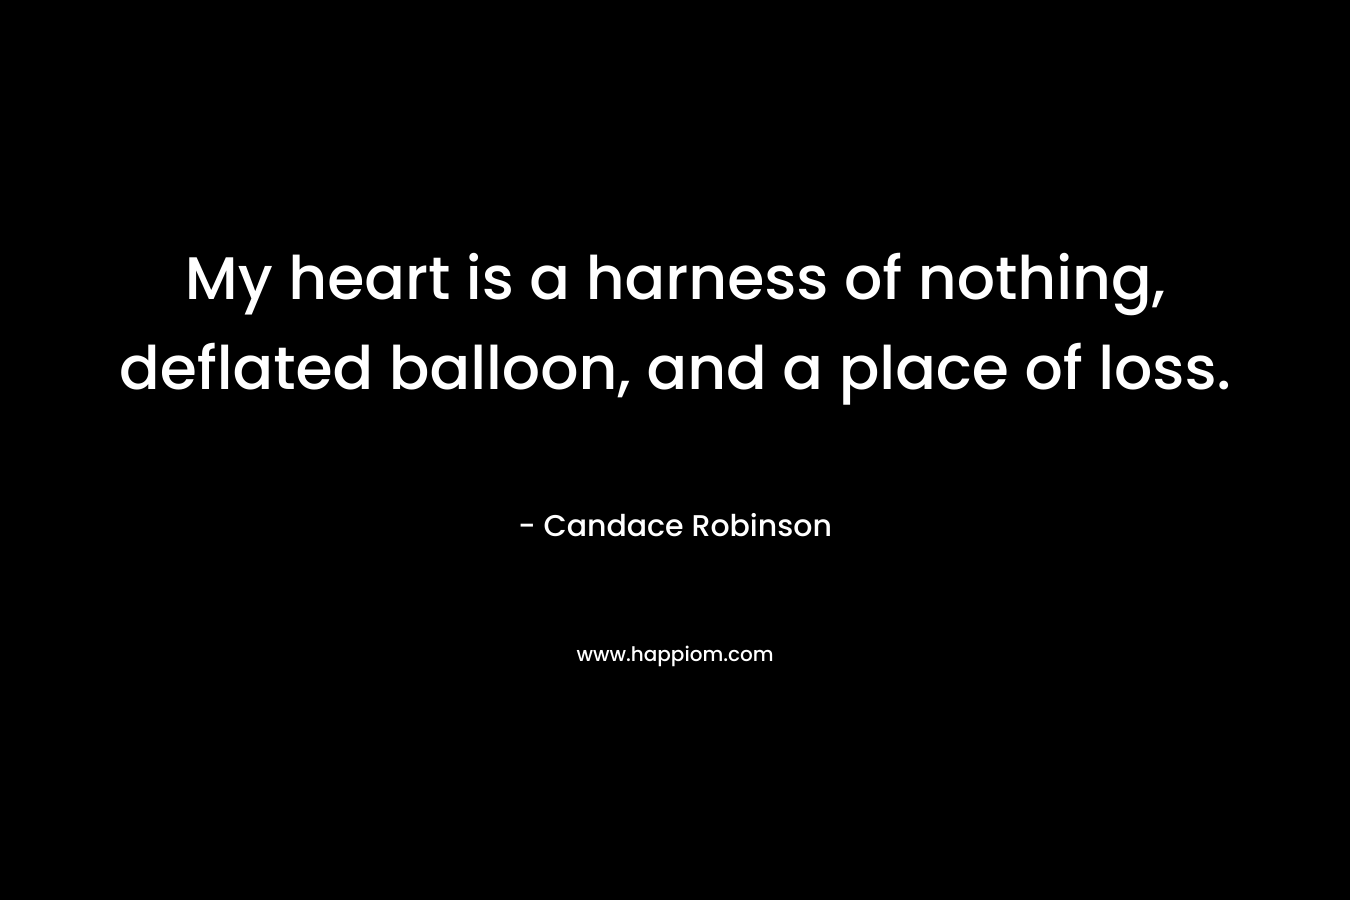 My heart is a harness of nothing, deflated balloon, and a place of loss. – Candace Robinson